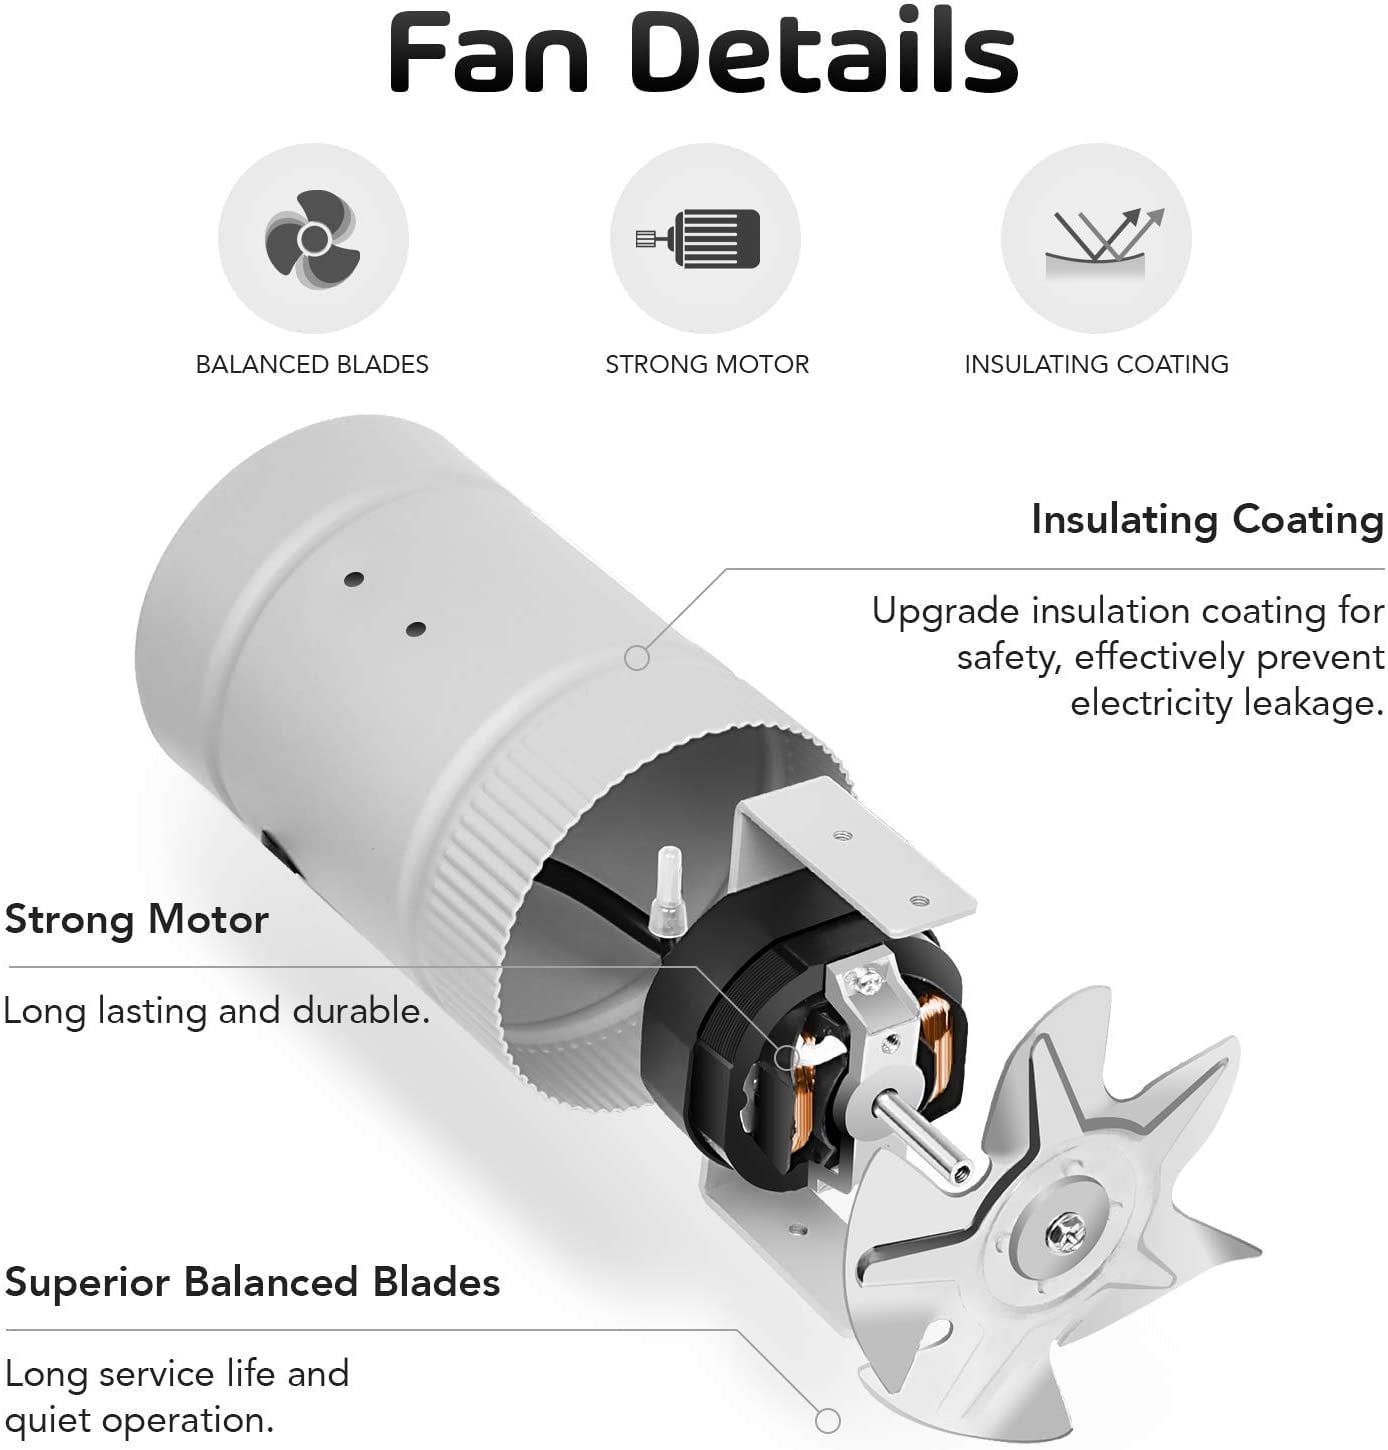 iPower 6 inch 174 CFM Booster Fan Inline Duct HVAC Exhaust Vent Blower, Low Noise Grounded Power Cord, Silver